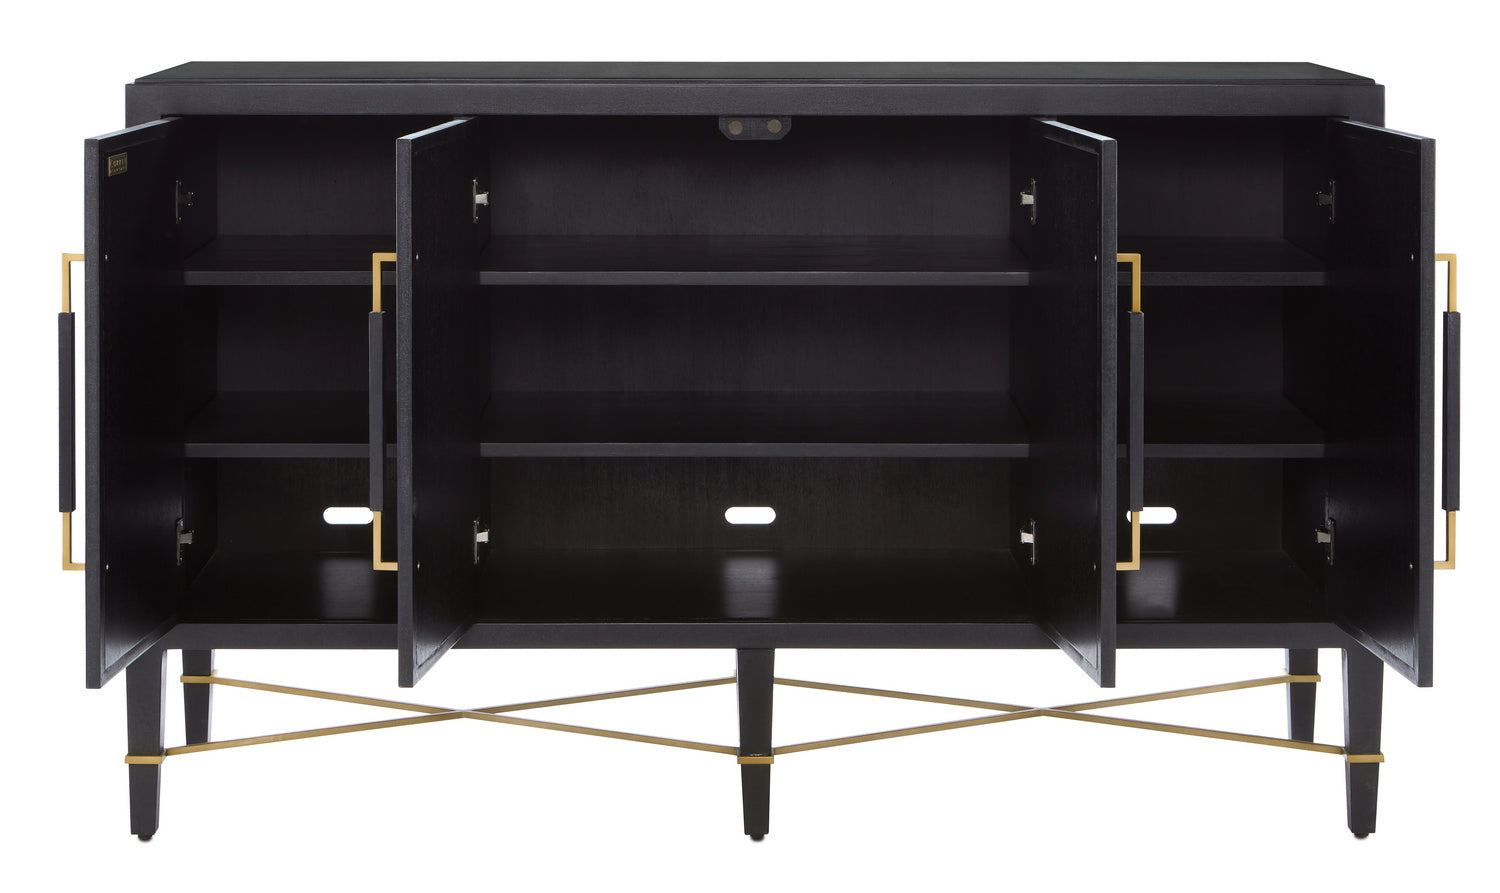 Sideboard from the Verona collection in Black Lacquered Linen/Champagne Metal finish